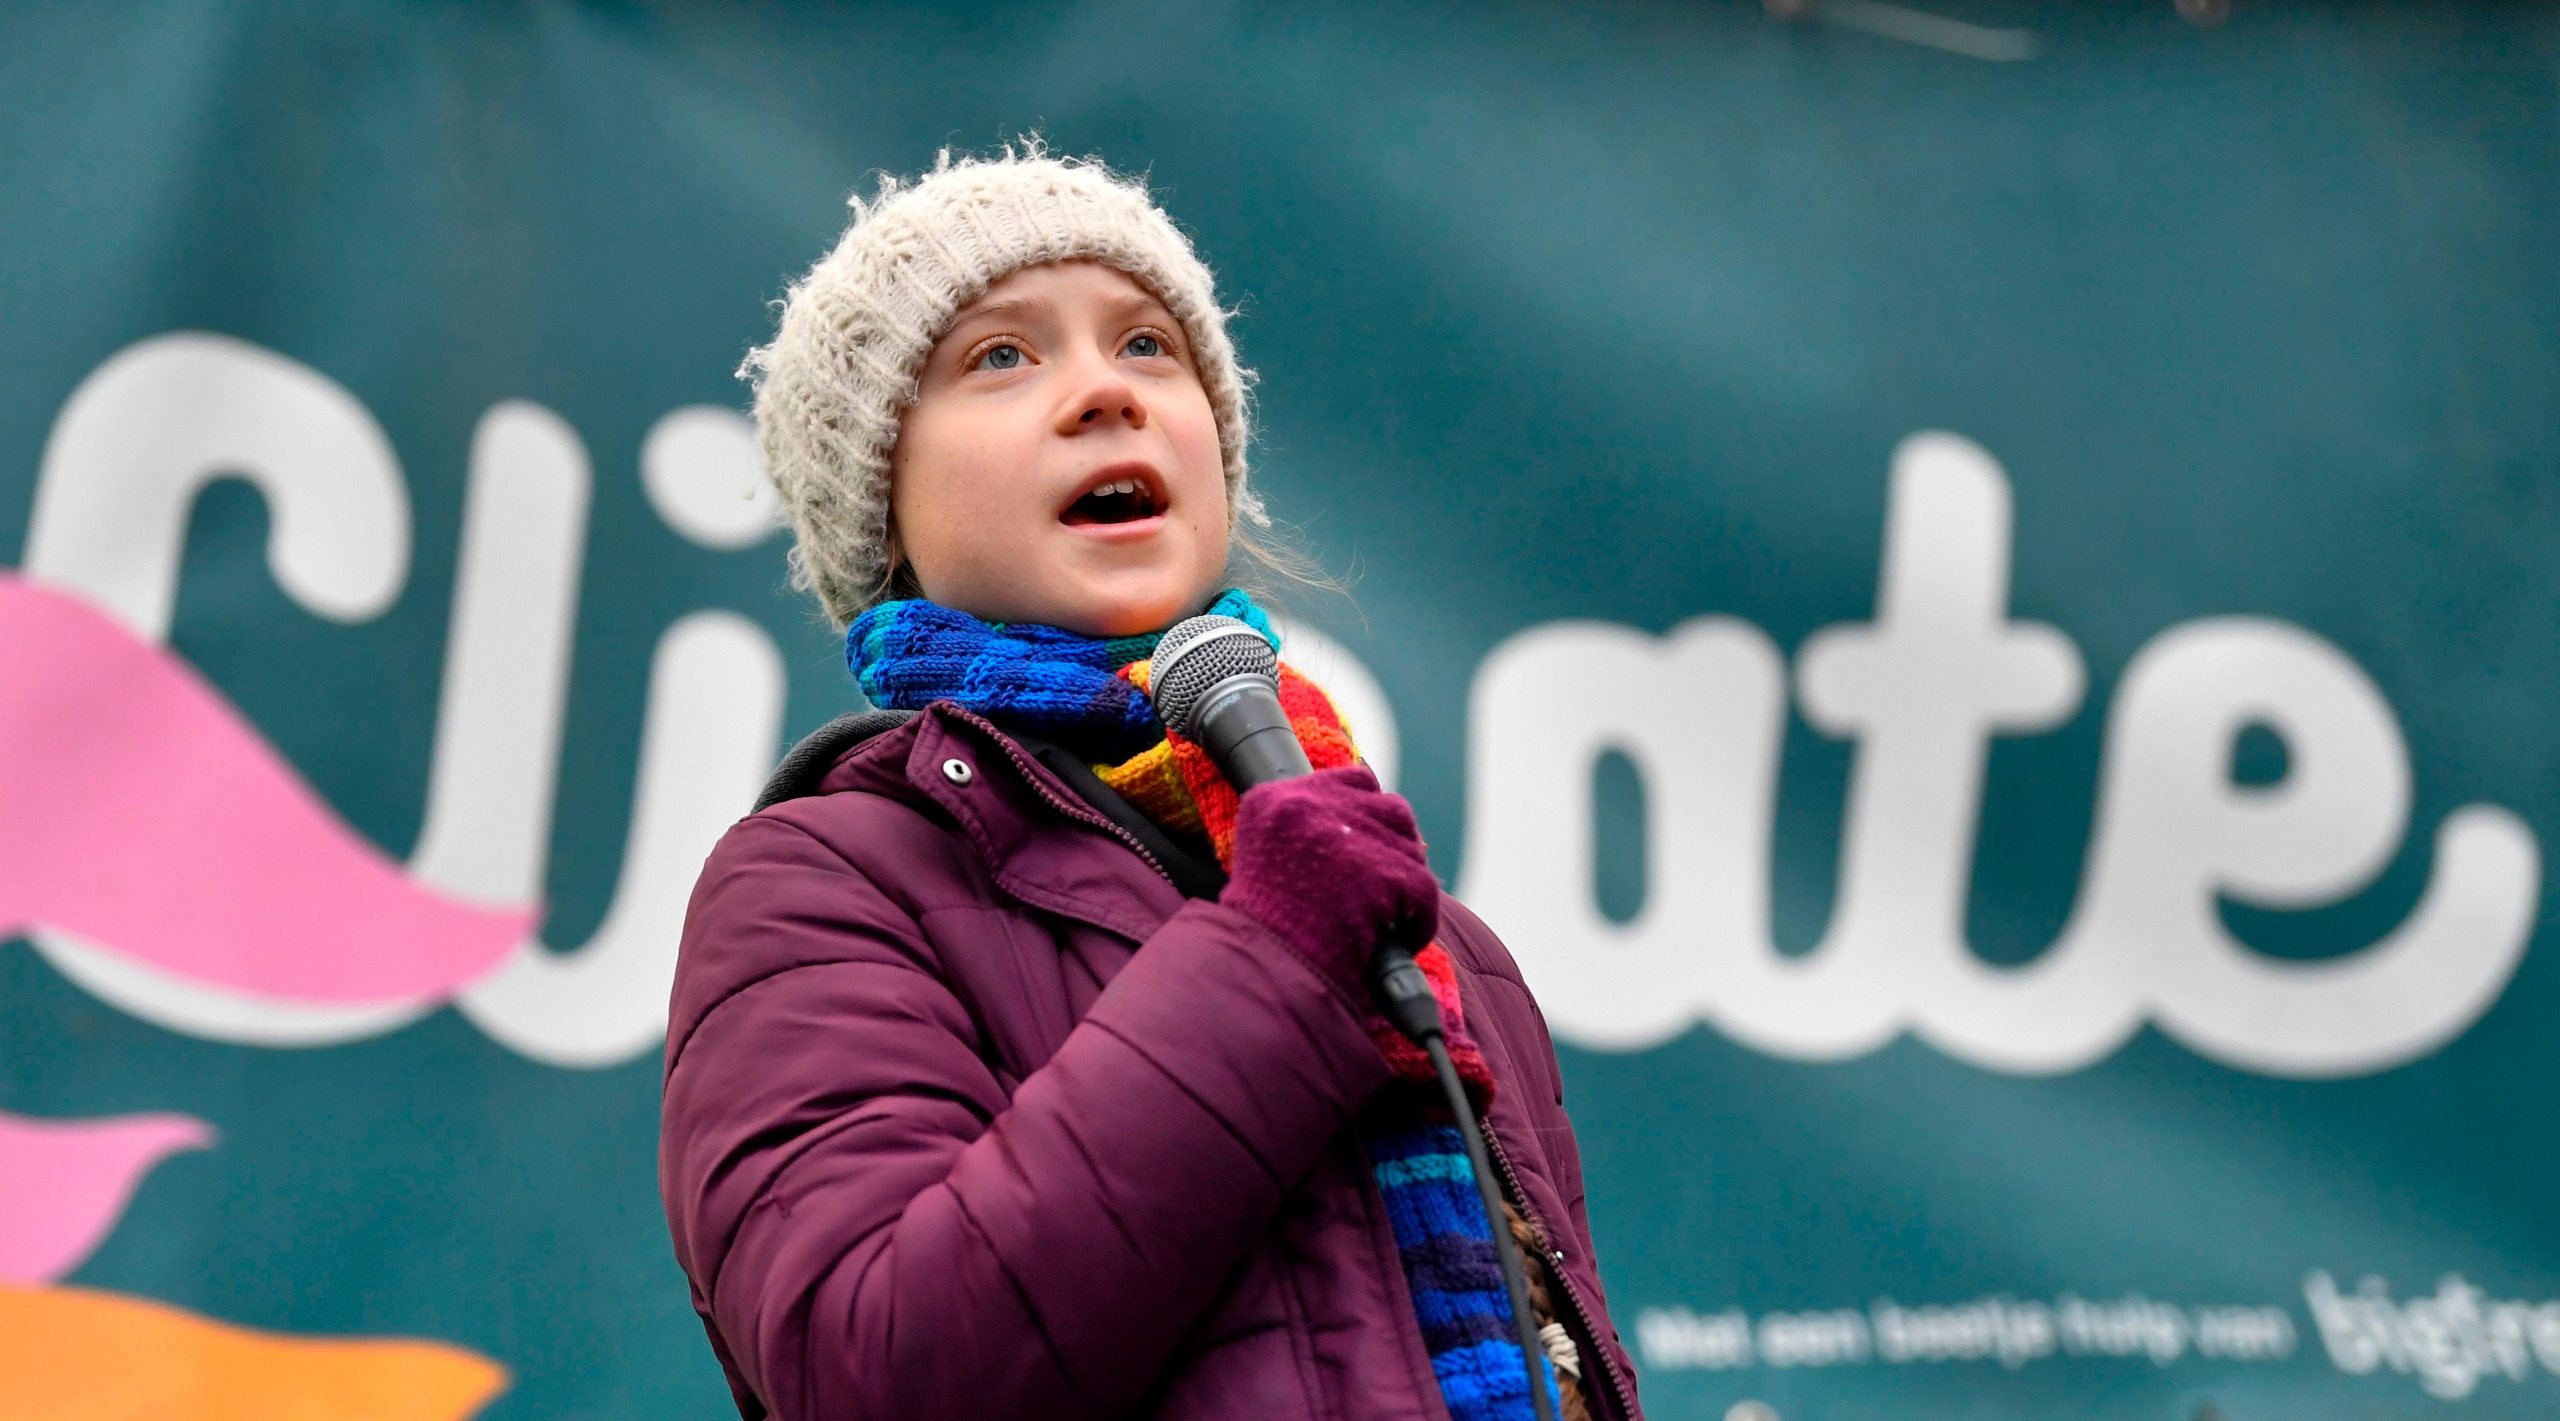 Greta Thunberg, wearing a grey hat and rainbow scarf, holding a microphone while speaking at a protest in Brussels in March, 2020.